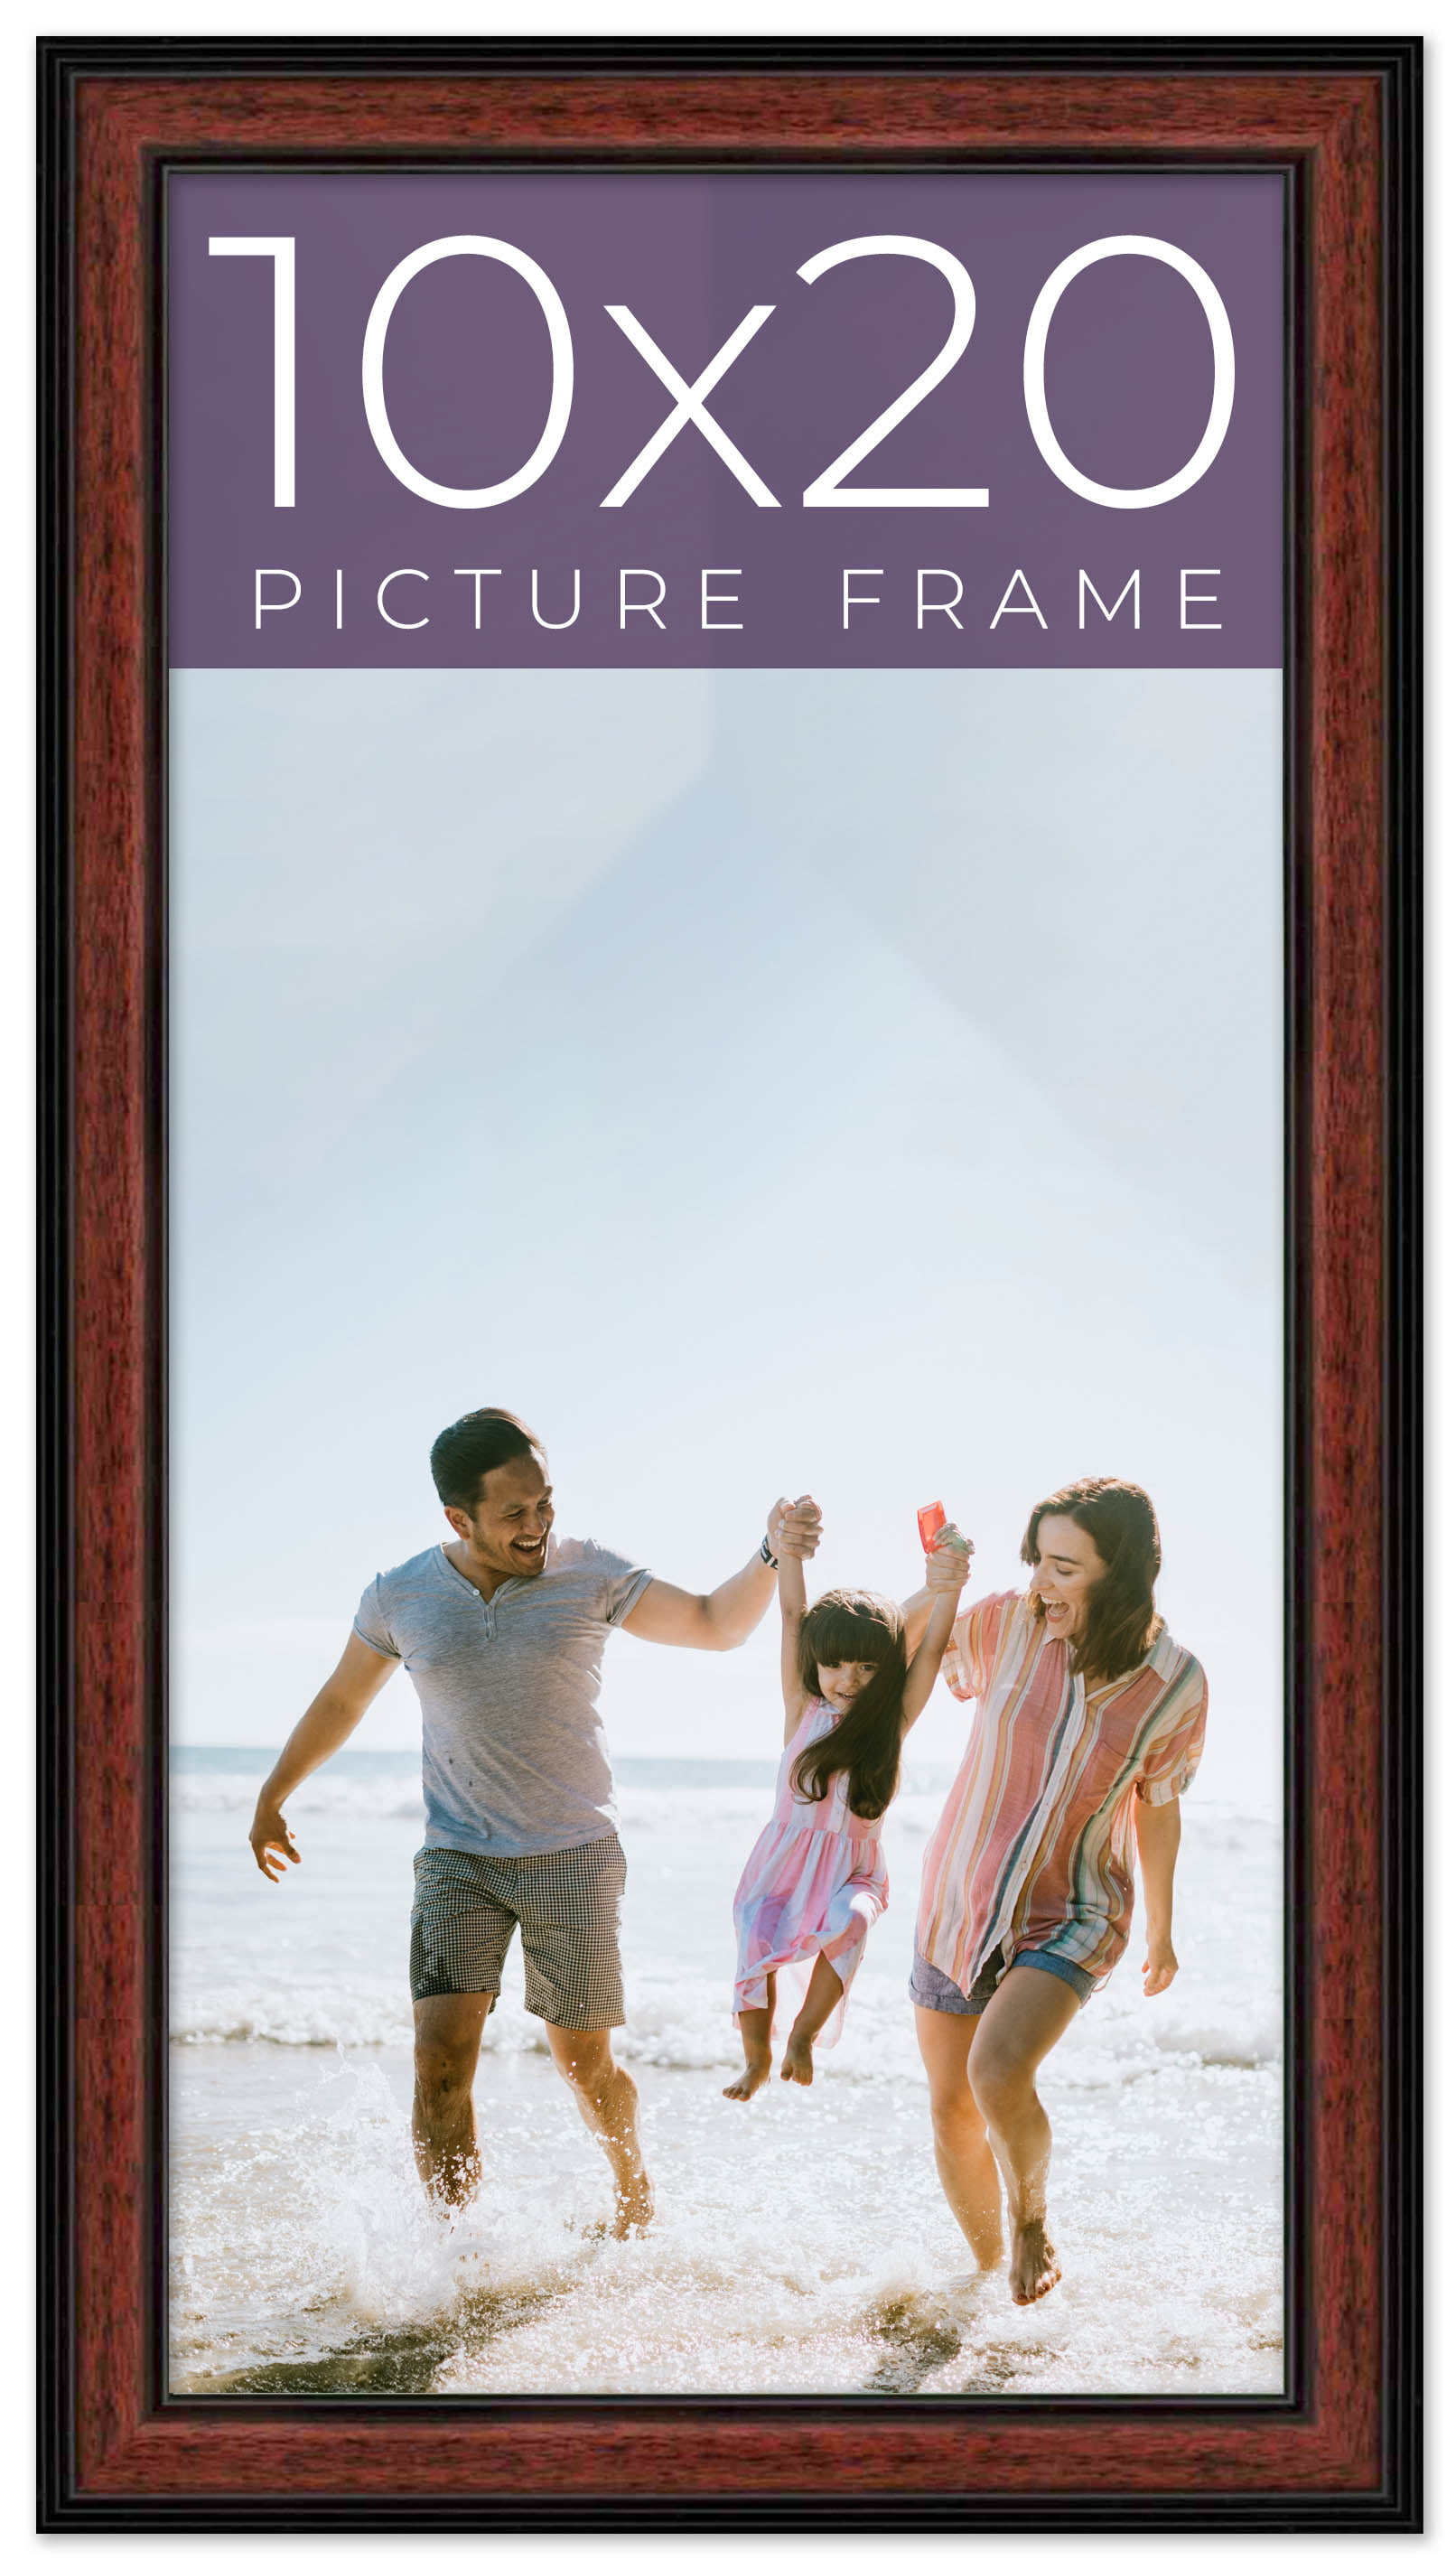 CustomPictureFrames 10x20 Modern Black Wood Picture Frame - with Acrylic Front and Foam Board Backing